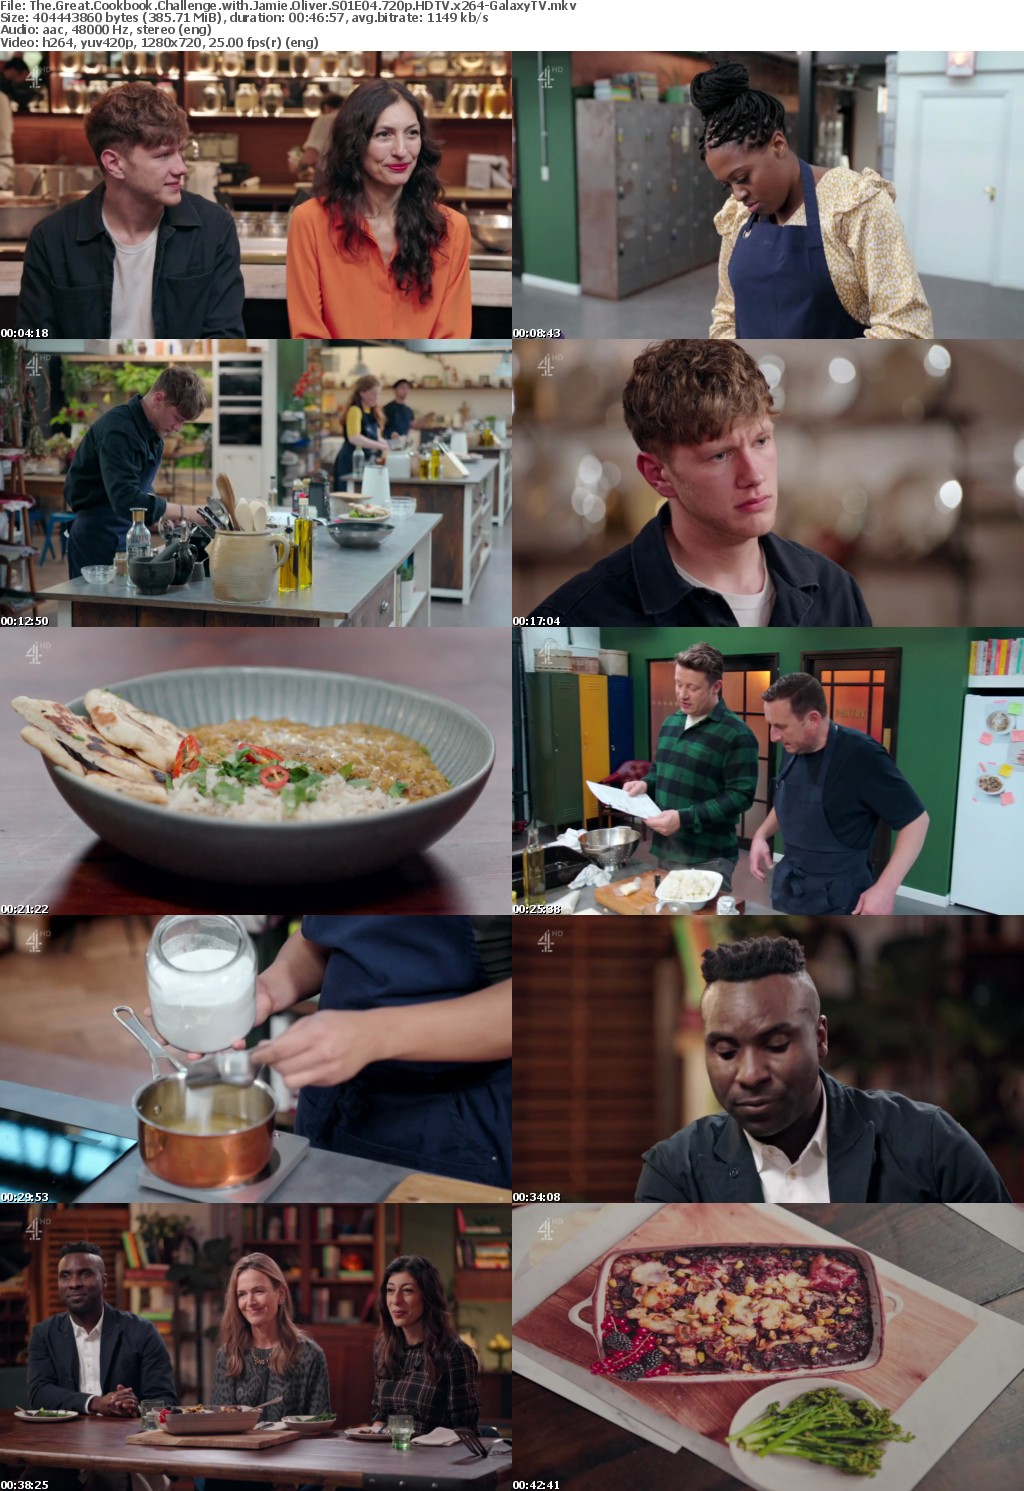 The Great Cookbook Challenge with Jamie Oliver S01 COMPLETE 720p HDTV x264-GalaxyTV